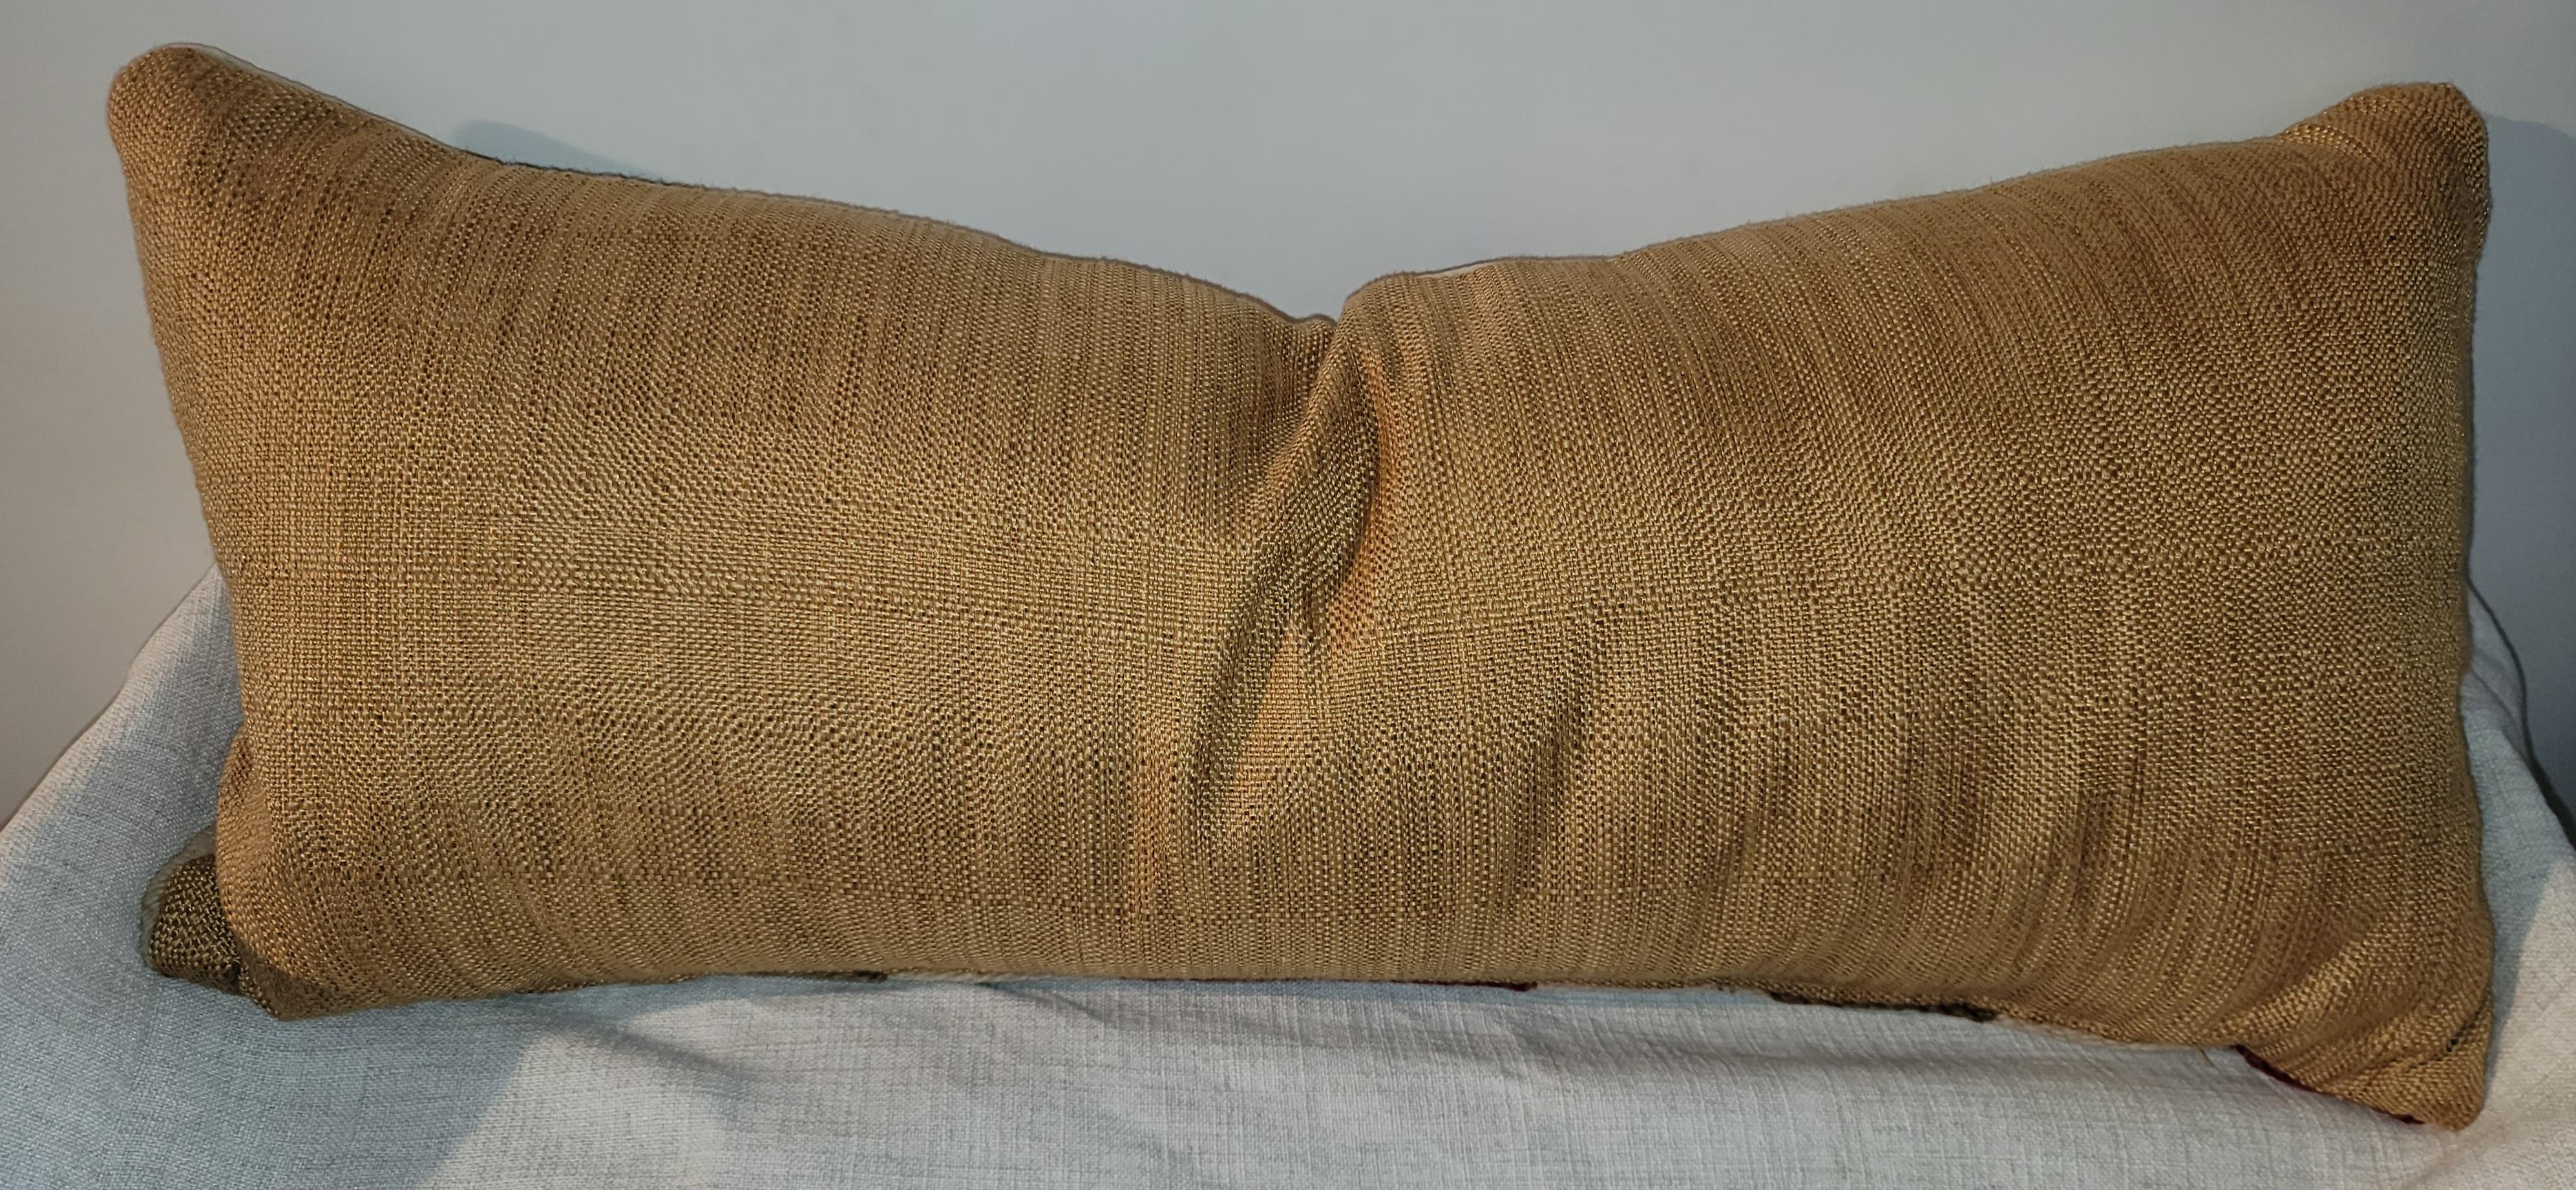 Early 20thc Navajo Indian Weaving -Eye Dazzler Pillow In Good Condition For Sale In Los Angeles, CA